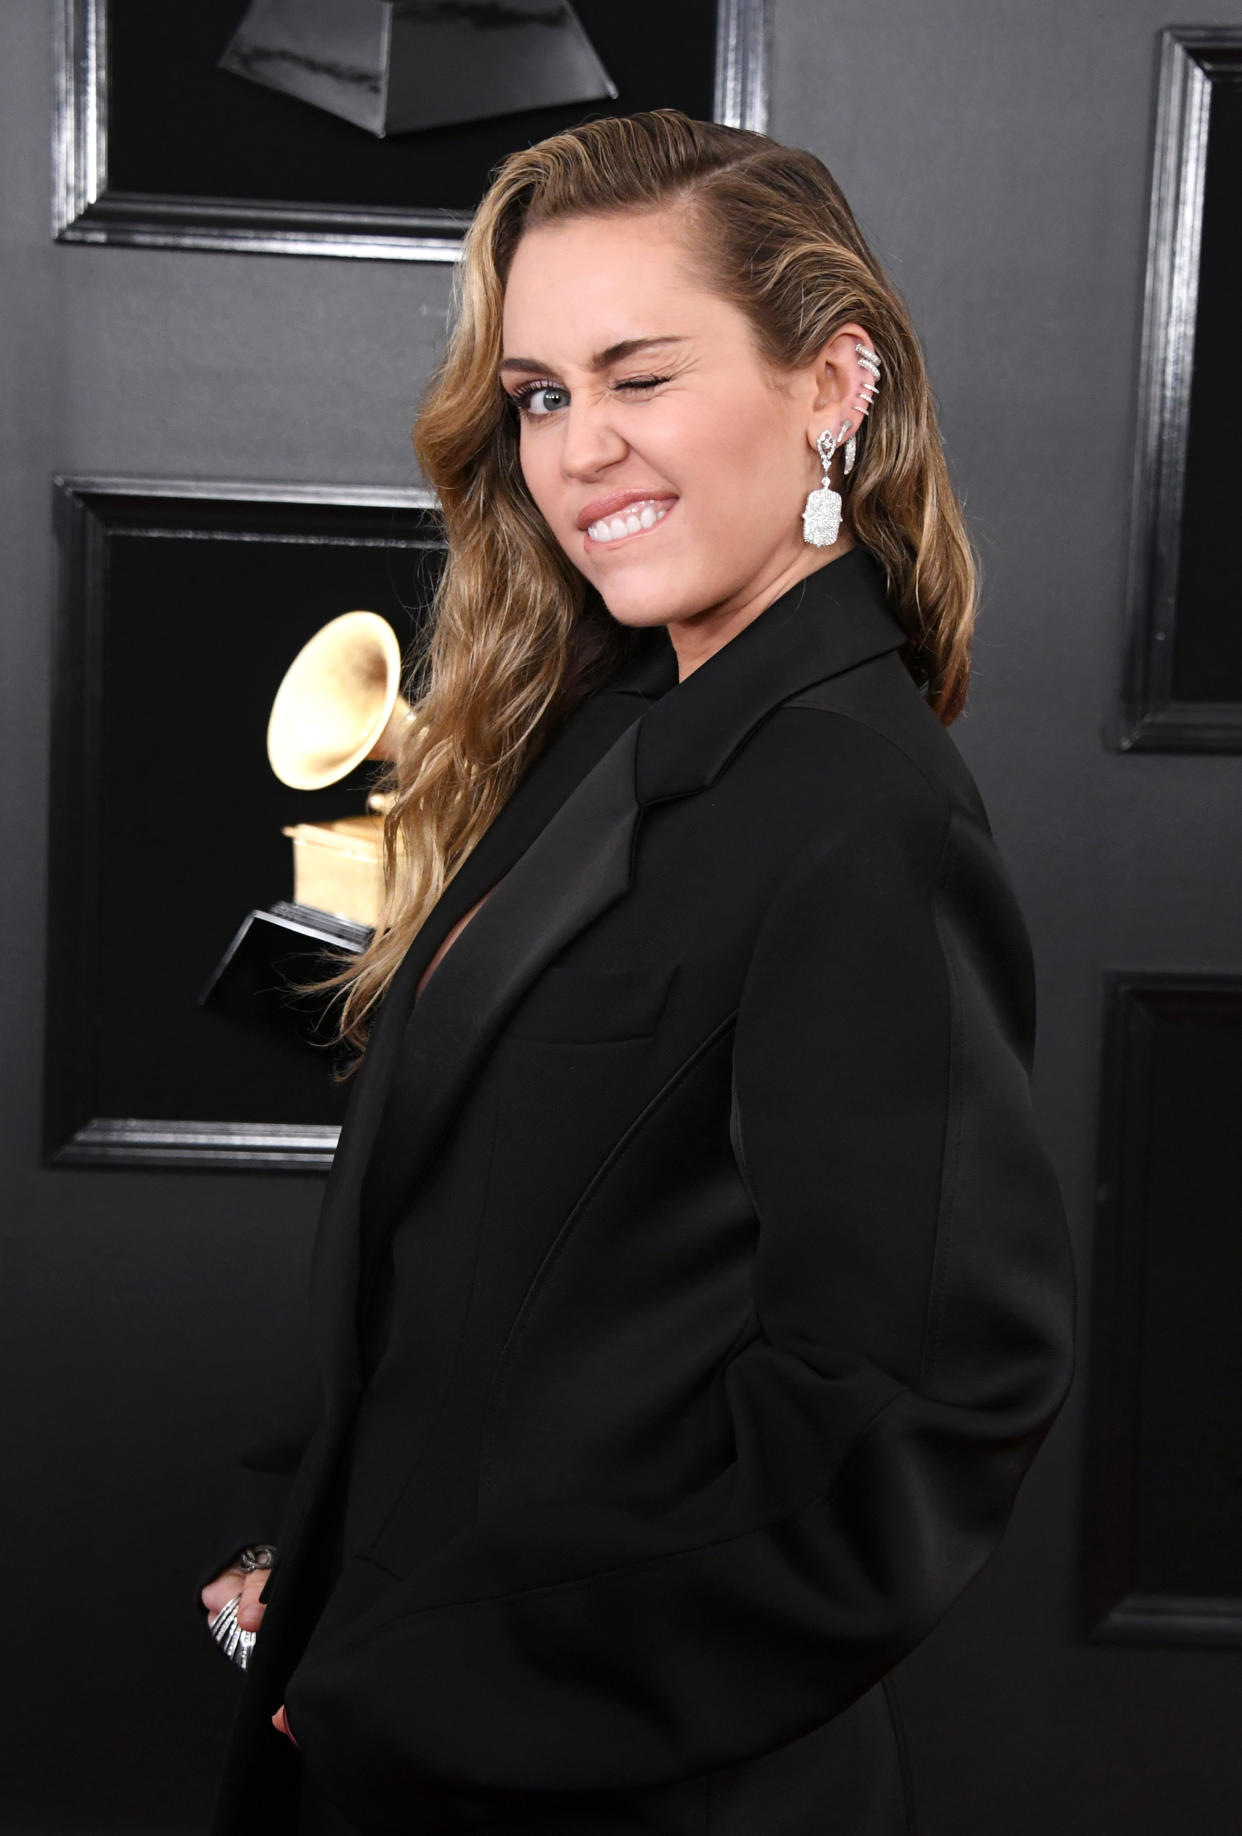 Miley Cyrus at the 61st Annual Grammy Awards on Feb. 10, 2019, in Los Angeles (Photo by Jon Kopaloff/Getty Images)